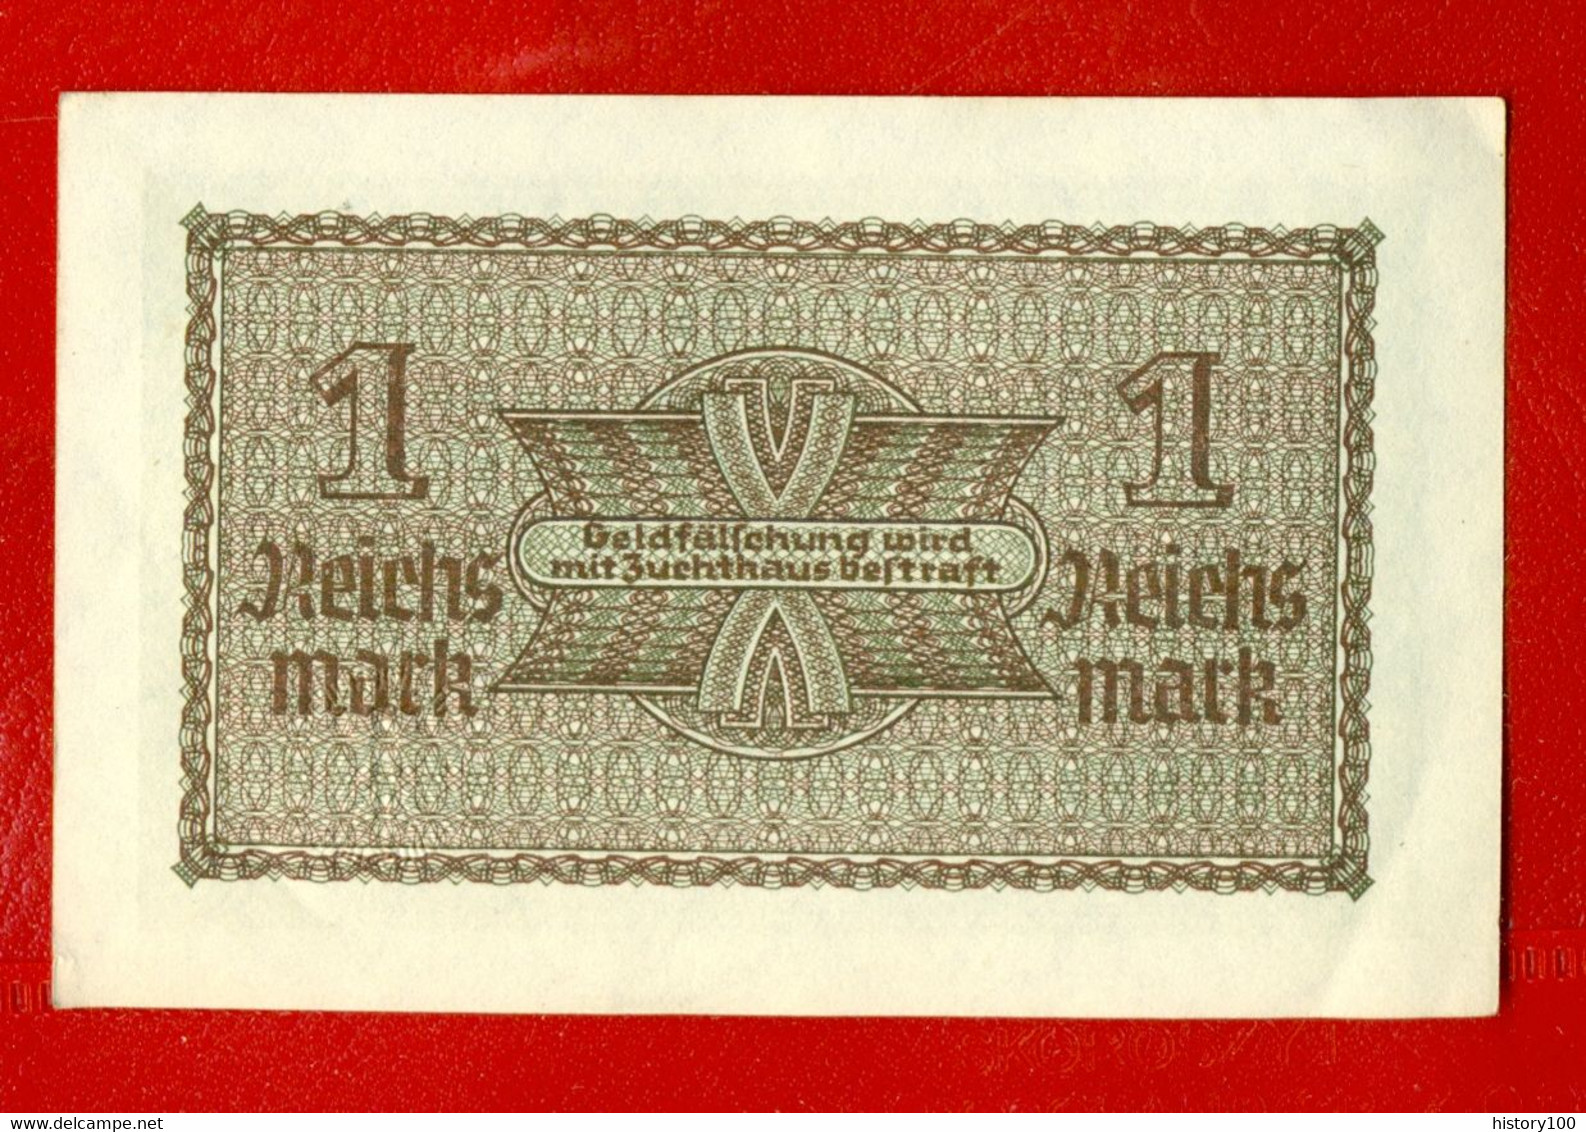 GERMANY LATVIA OCCUPIED TERRITORIES WWll 1 REICHSMARK 1940-45 P R136a AUNC 300 - 2° Guerre Mondiale